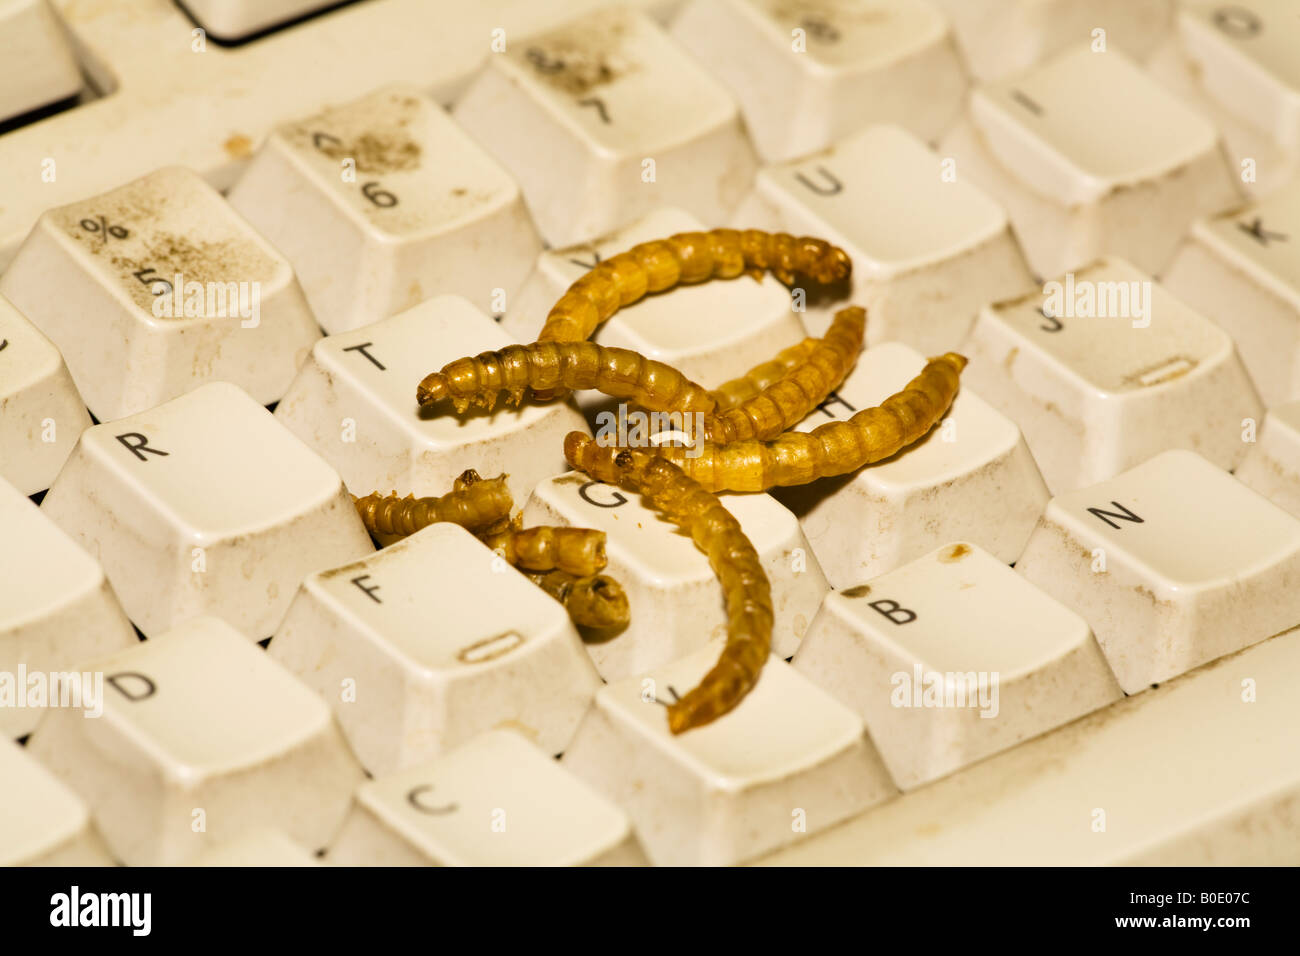 Dirty computer keyboard with meal worms Stock Photo